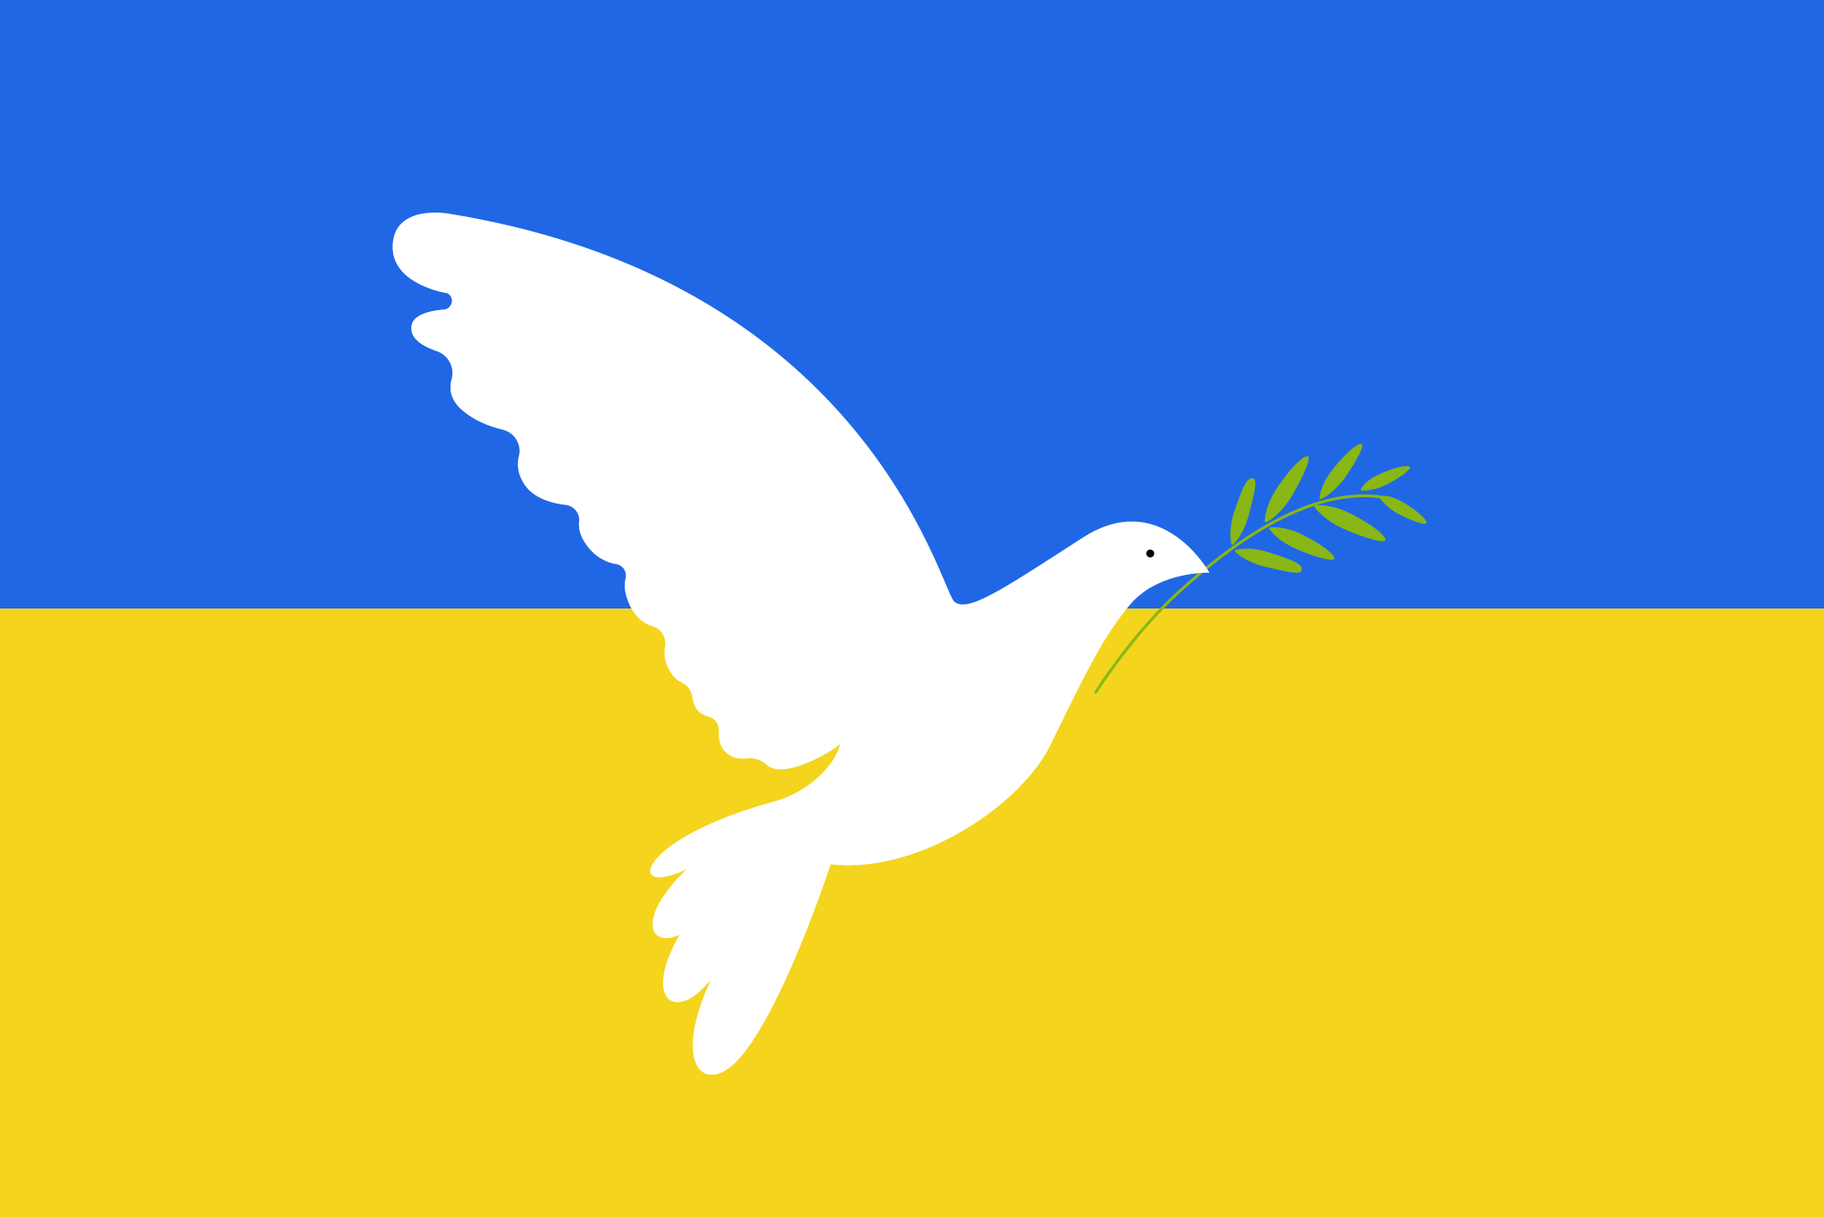 How You Can Support Ukraine